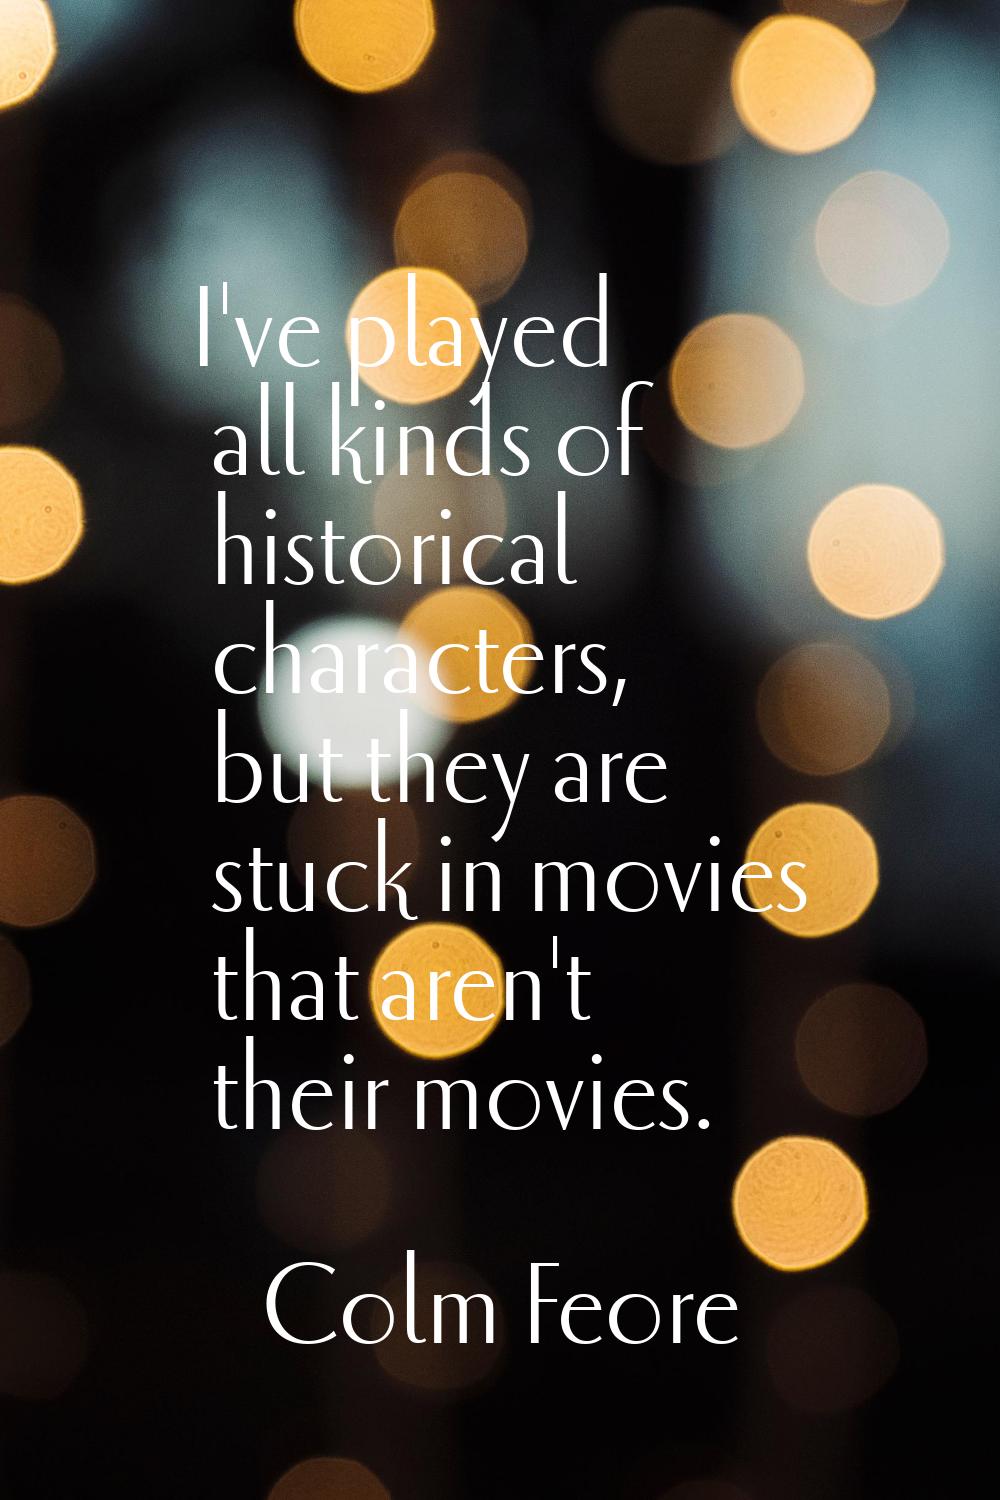 I've played all kinds of historical characters, but they are stuck in movies that aren't their movi